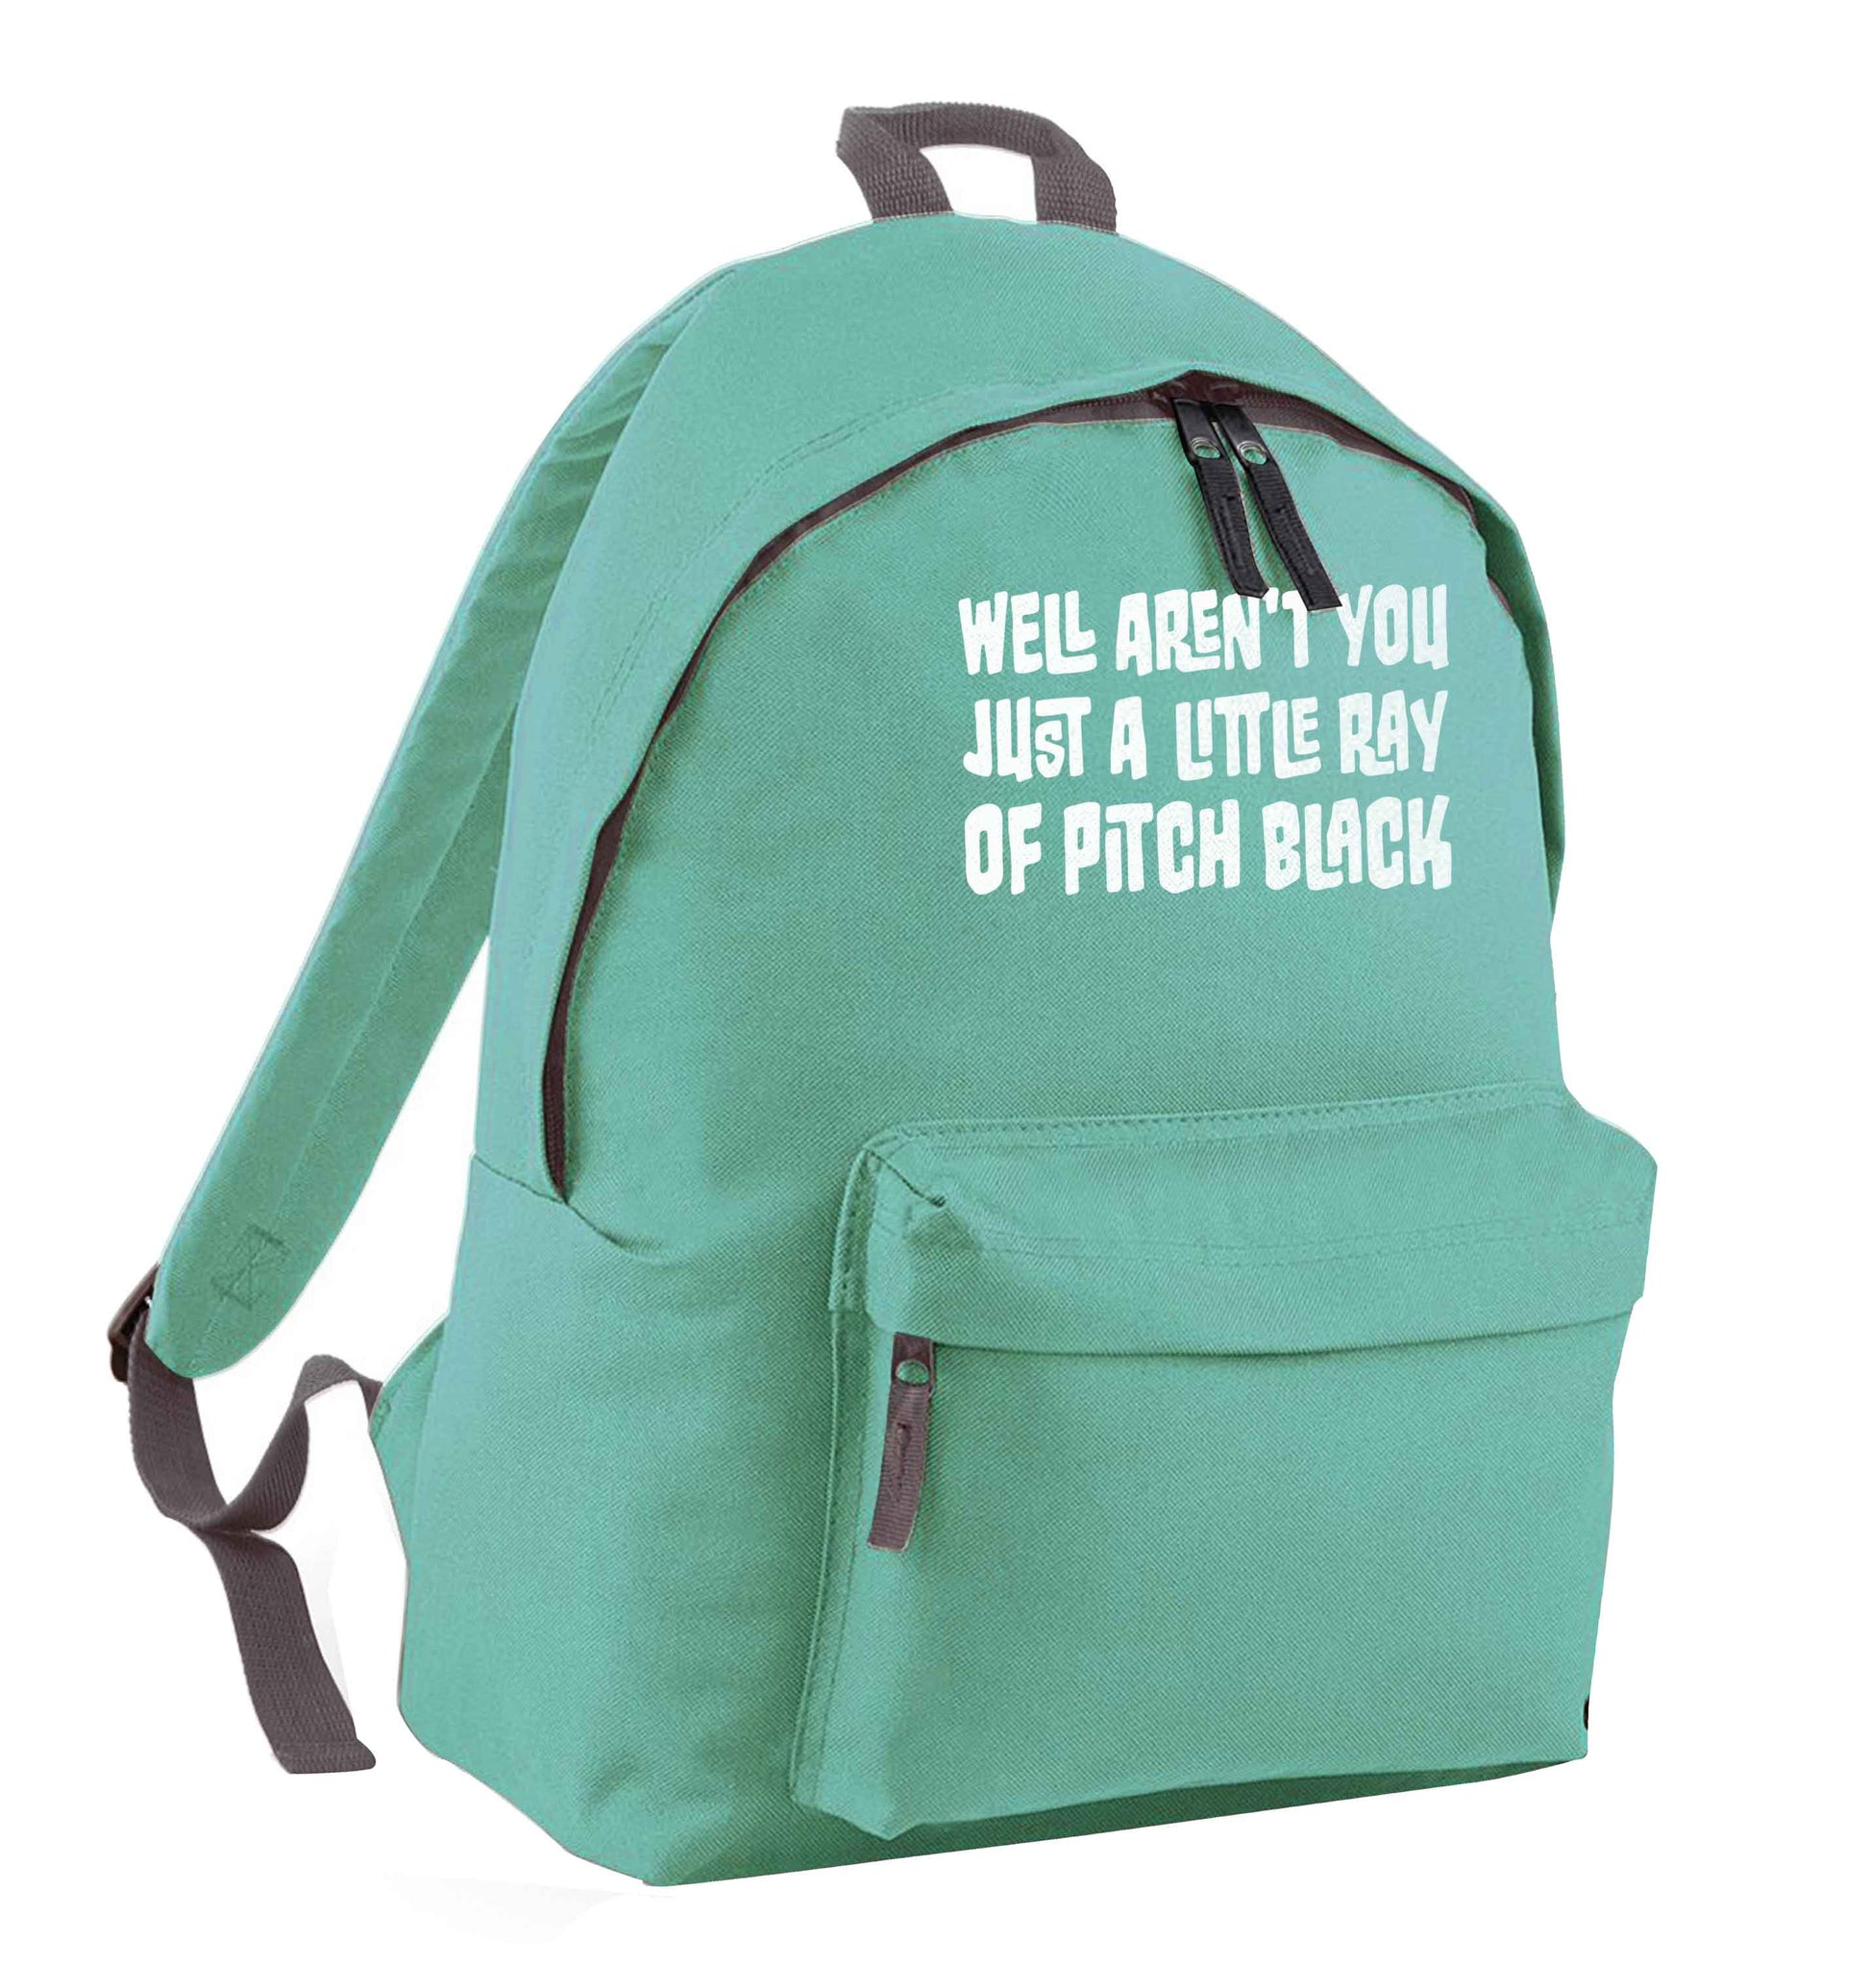 Well aren't you just a little ray of pitch black Kit mint adults backpack